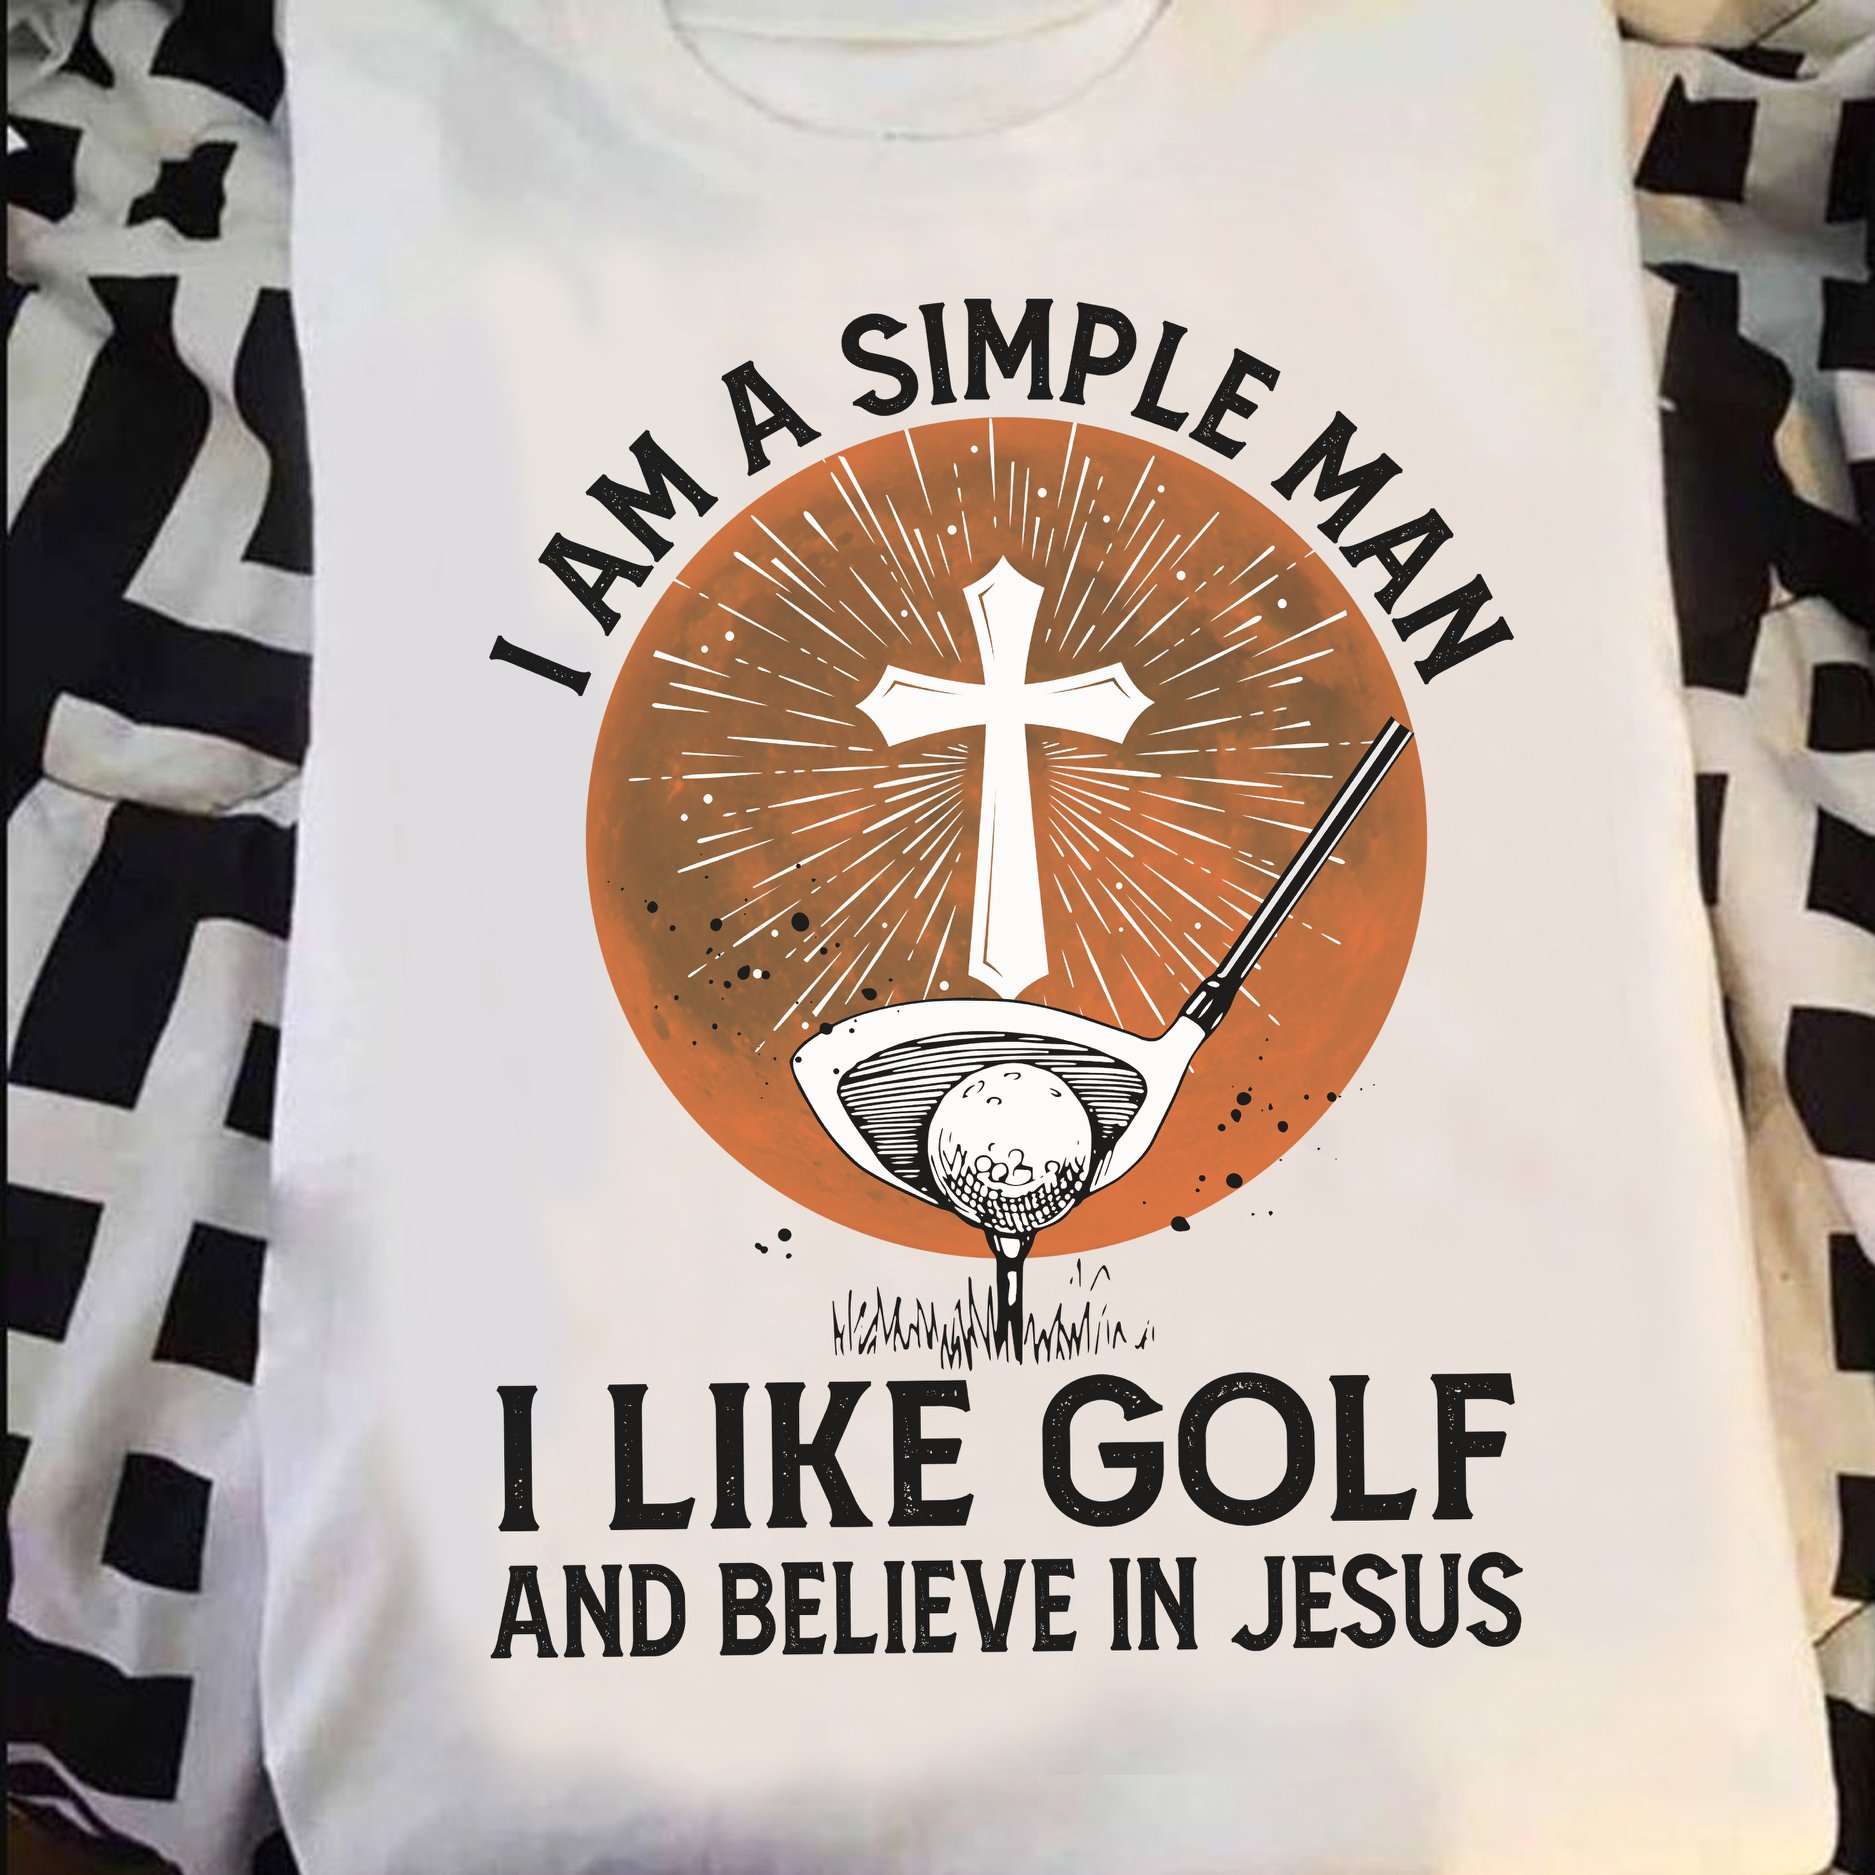 Golf Man, God's Cross - I am a simple man i like golf and believe in Jesus